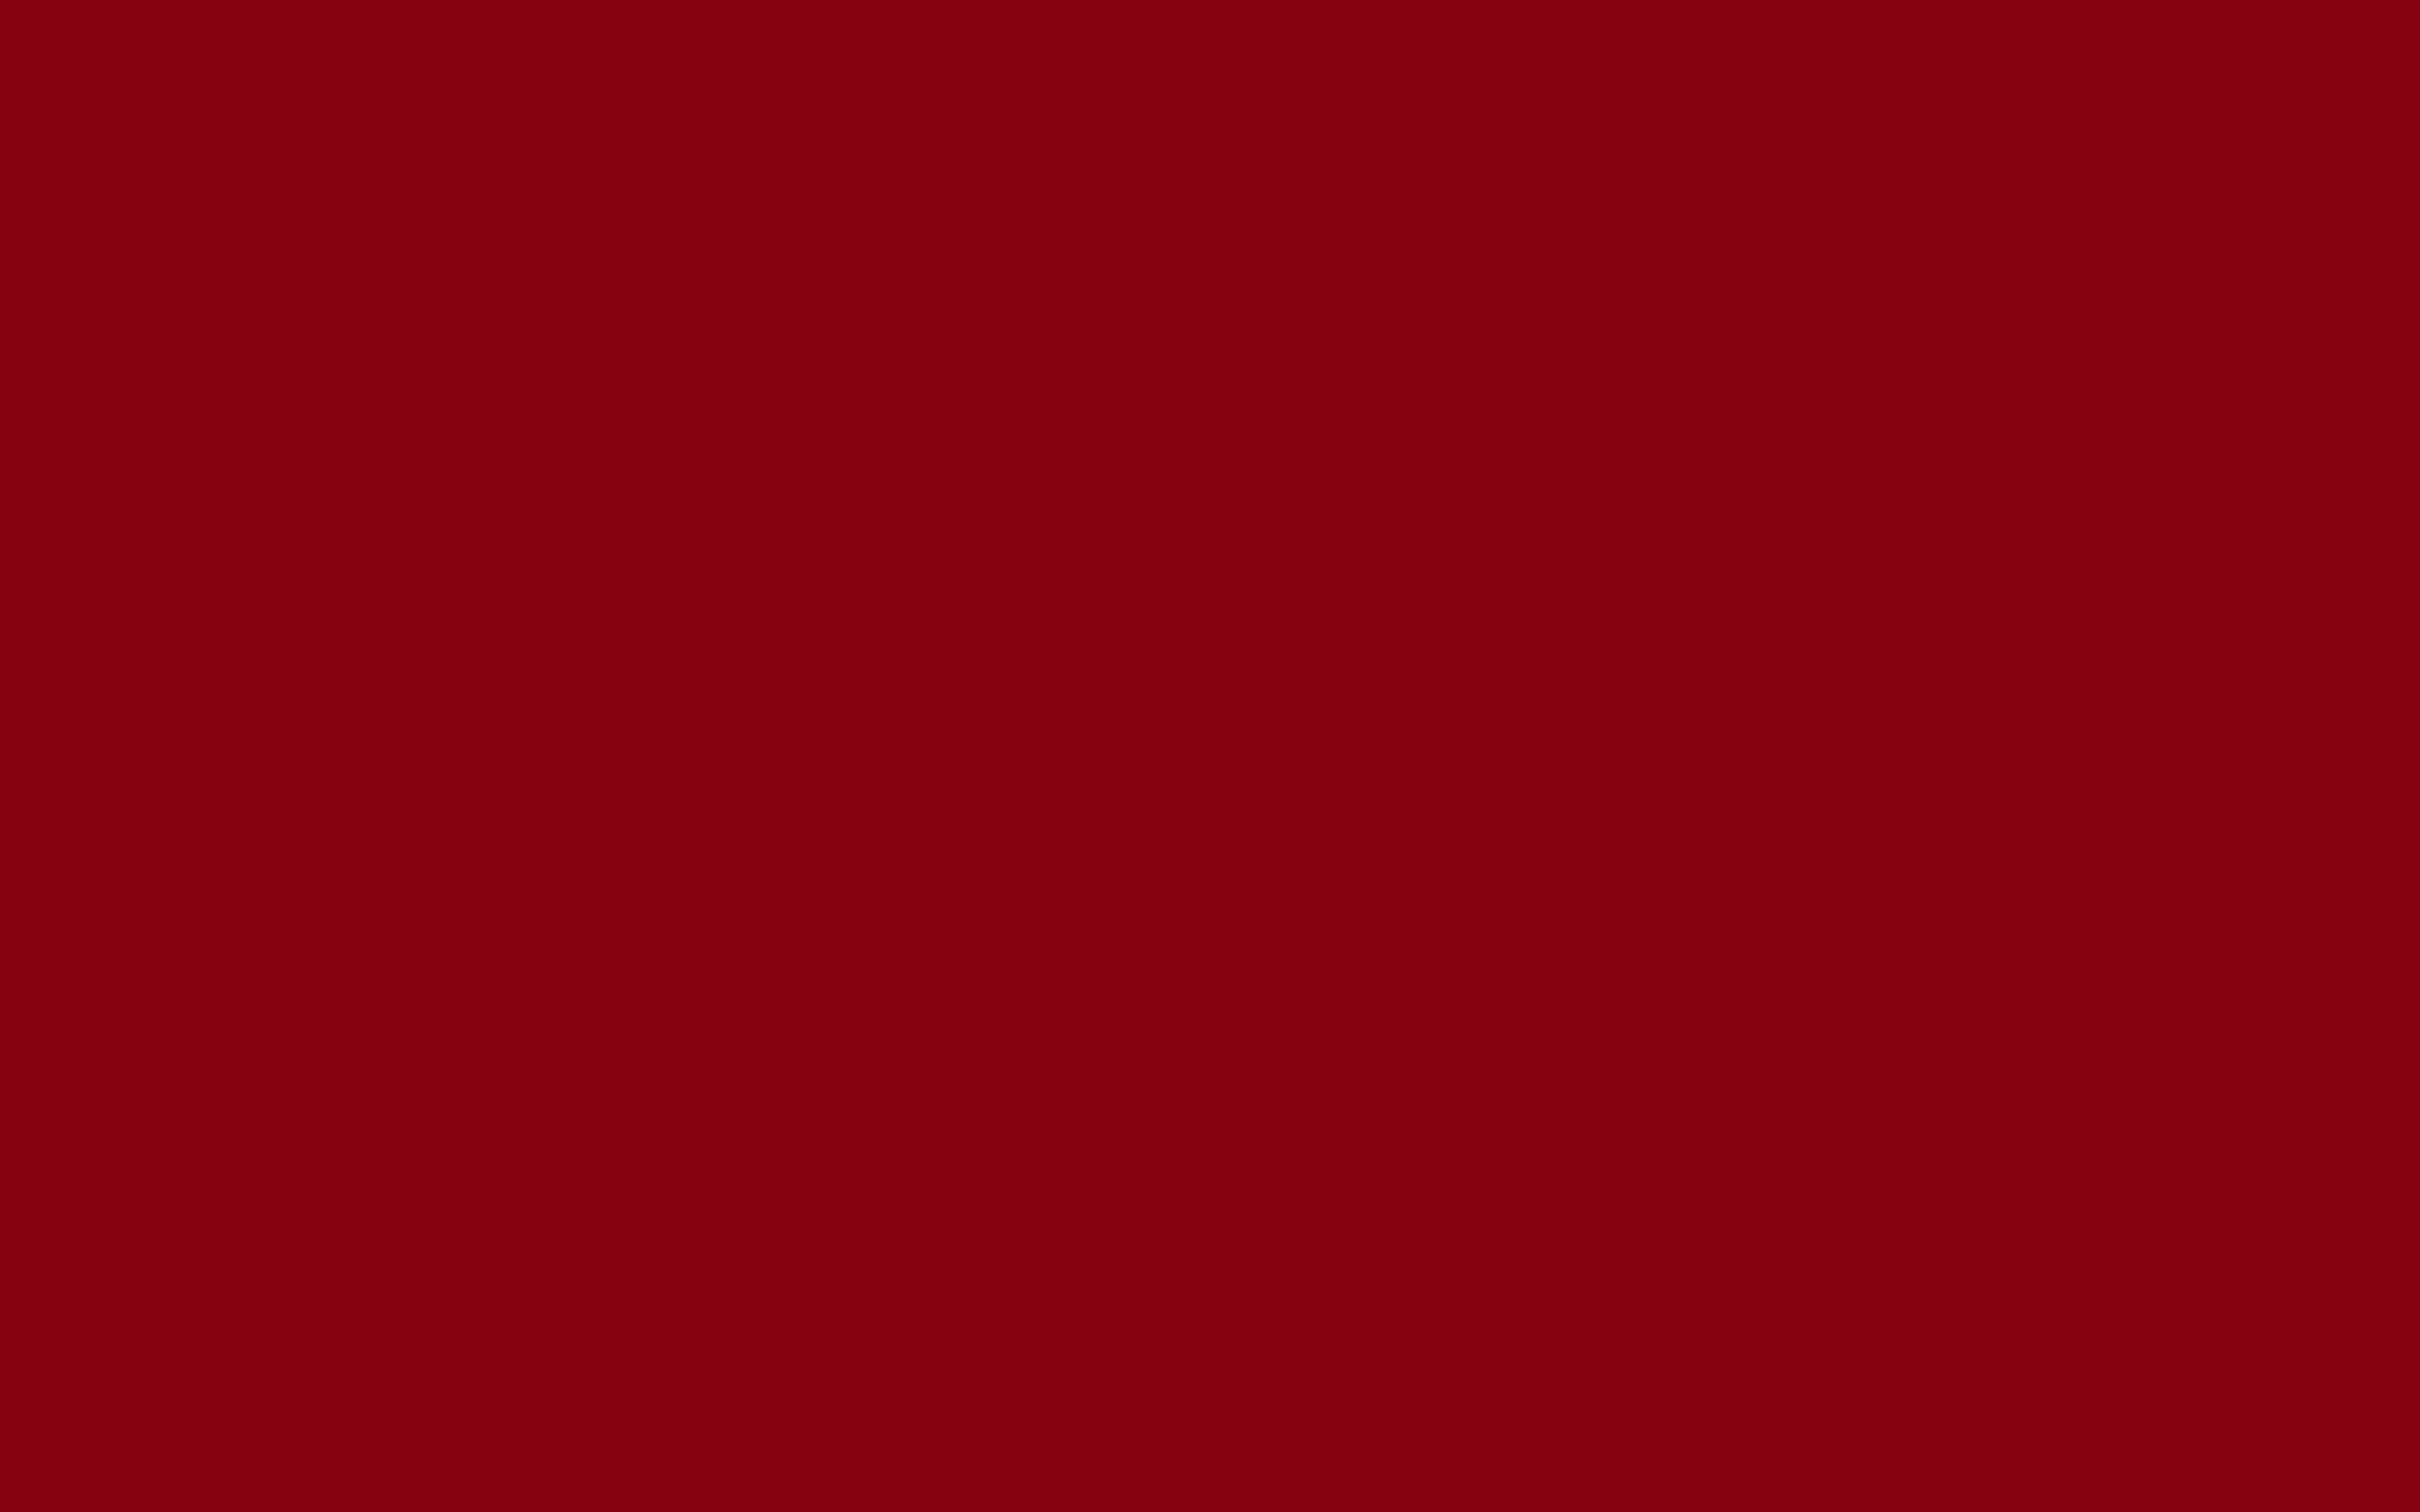 Solid Red Color Background Image Pictures Becuo